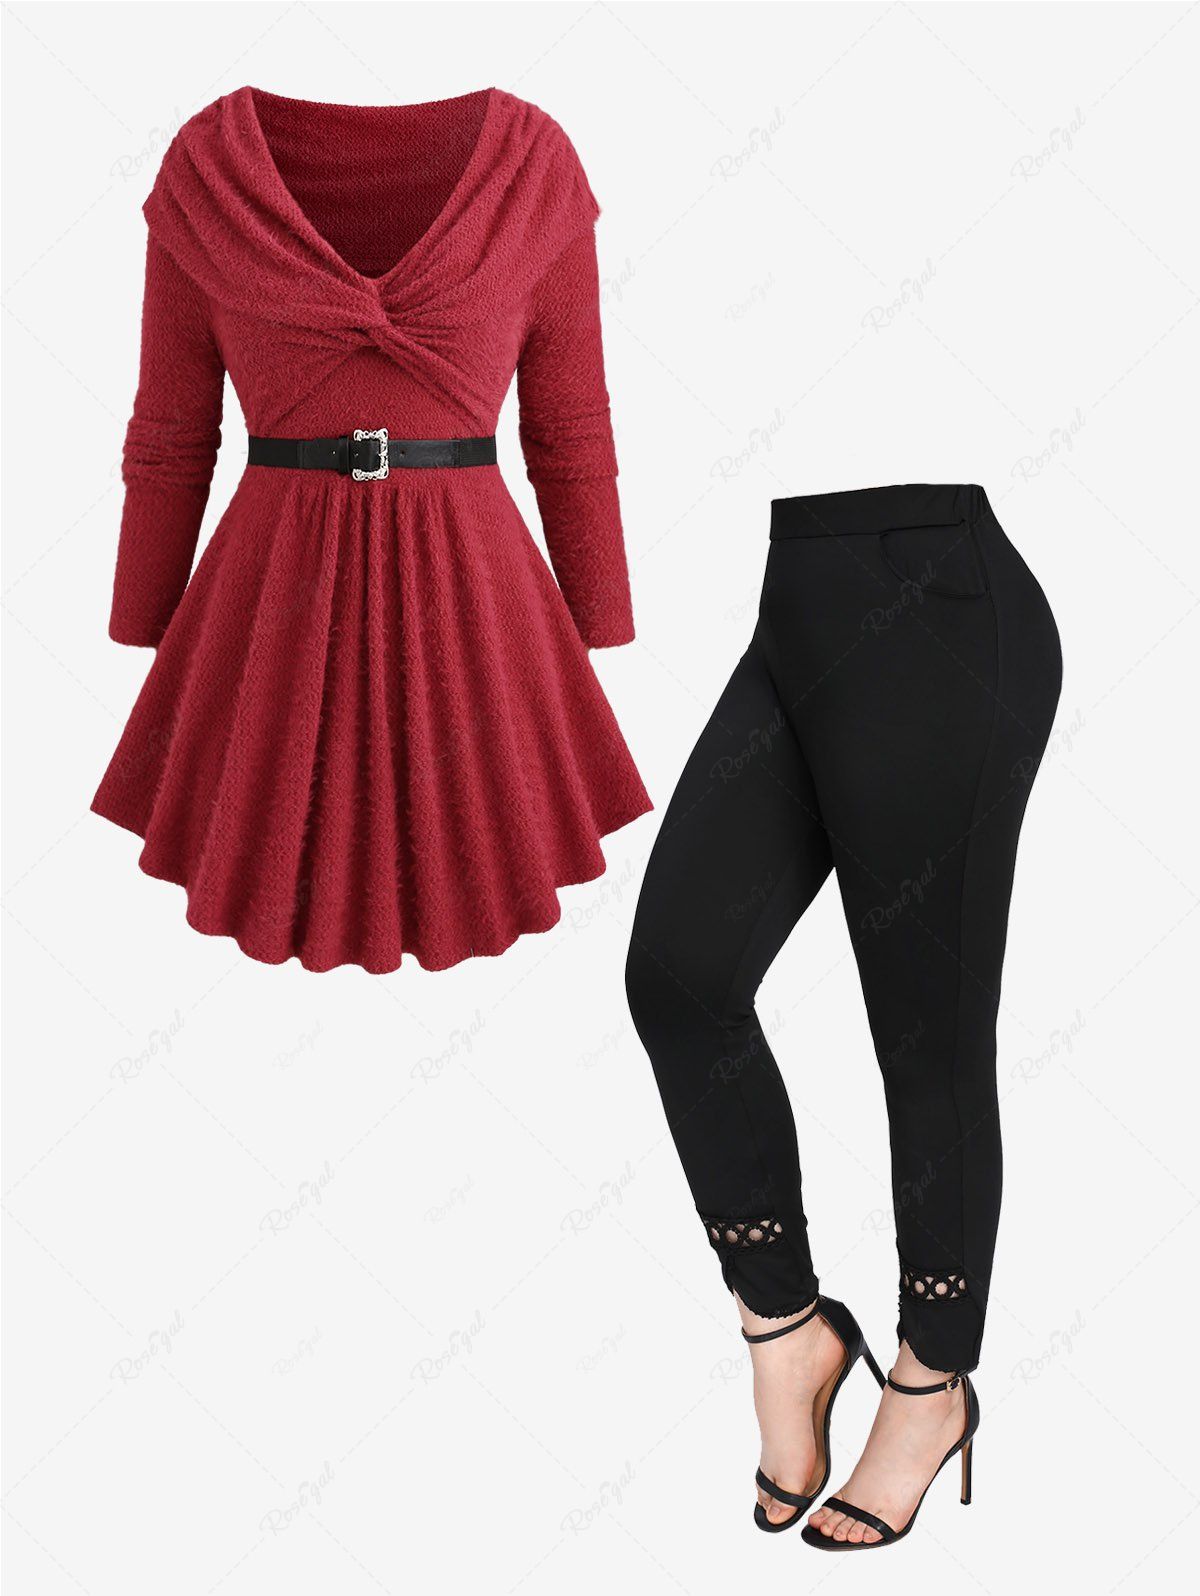 Best Twist Ruched Ruffles Buckle Belt Turndown Collar Off The Shoulder Woolen Sweater and Hollow Out Lace Trim Pockets Leggings Plus Size Outfit  